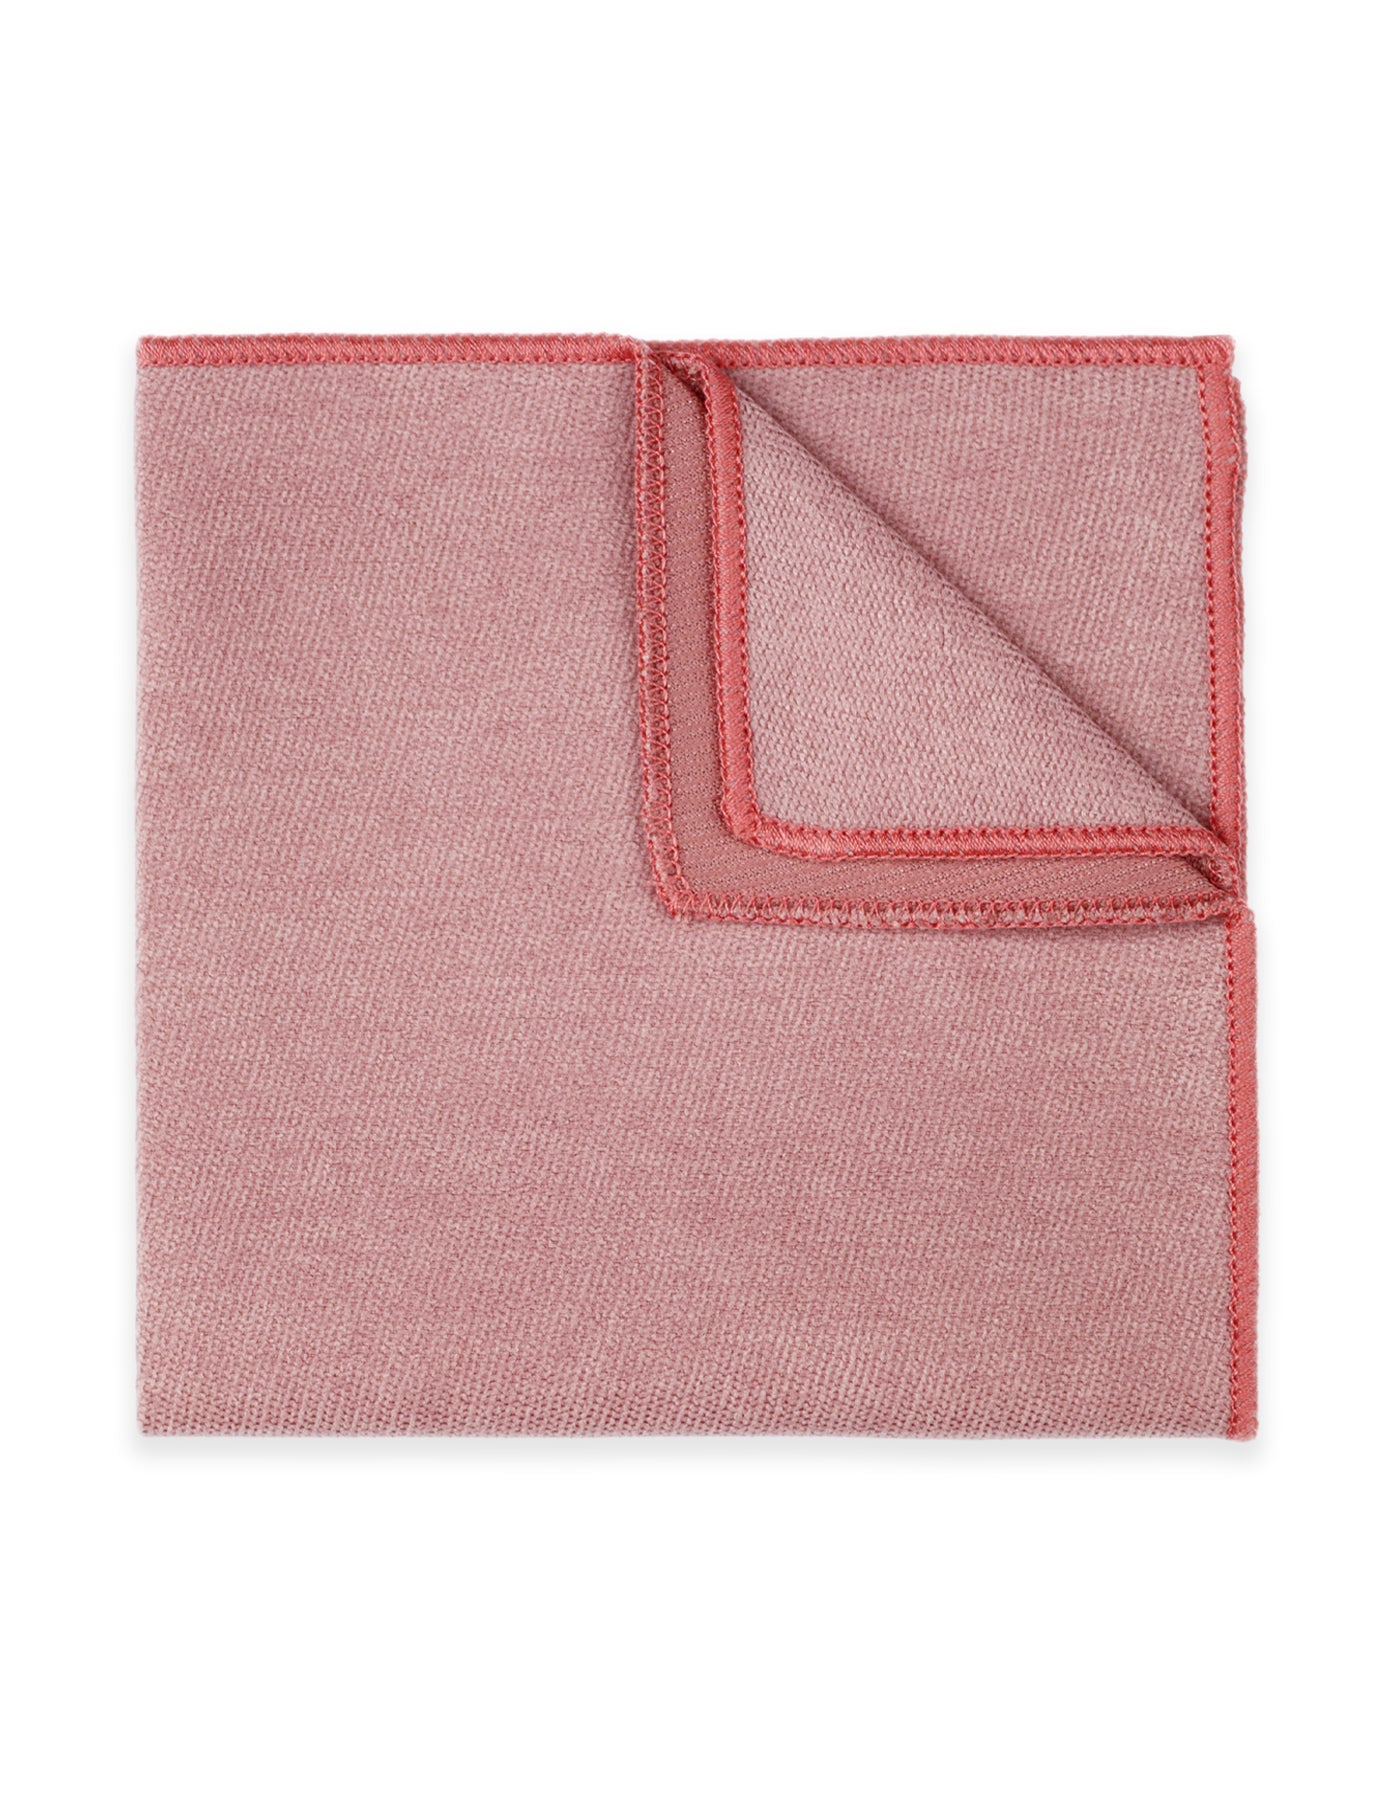 100% Brushed Cotton Suede Tie - Pink